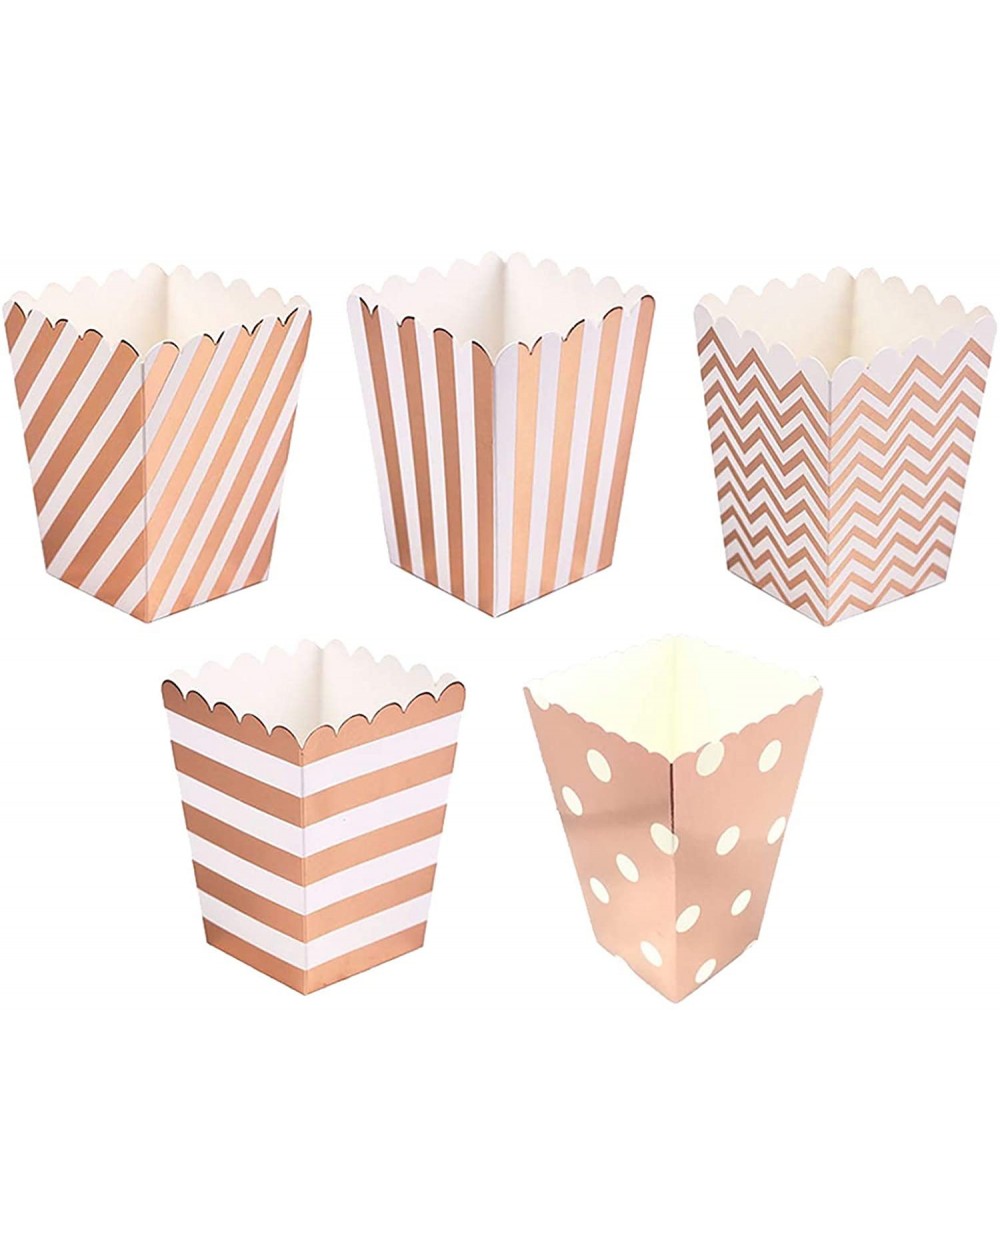 Favors Rose Gold Open-Top Popcorn Box Set of 60 Popcorn Favor Boxes Cardboard Candy Container Parties Mini Paper Popcorn Cont...